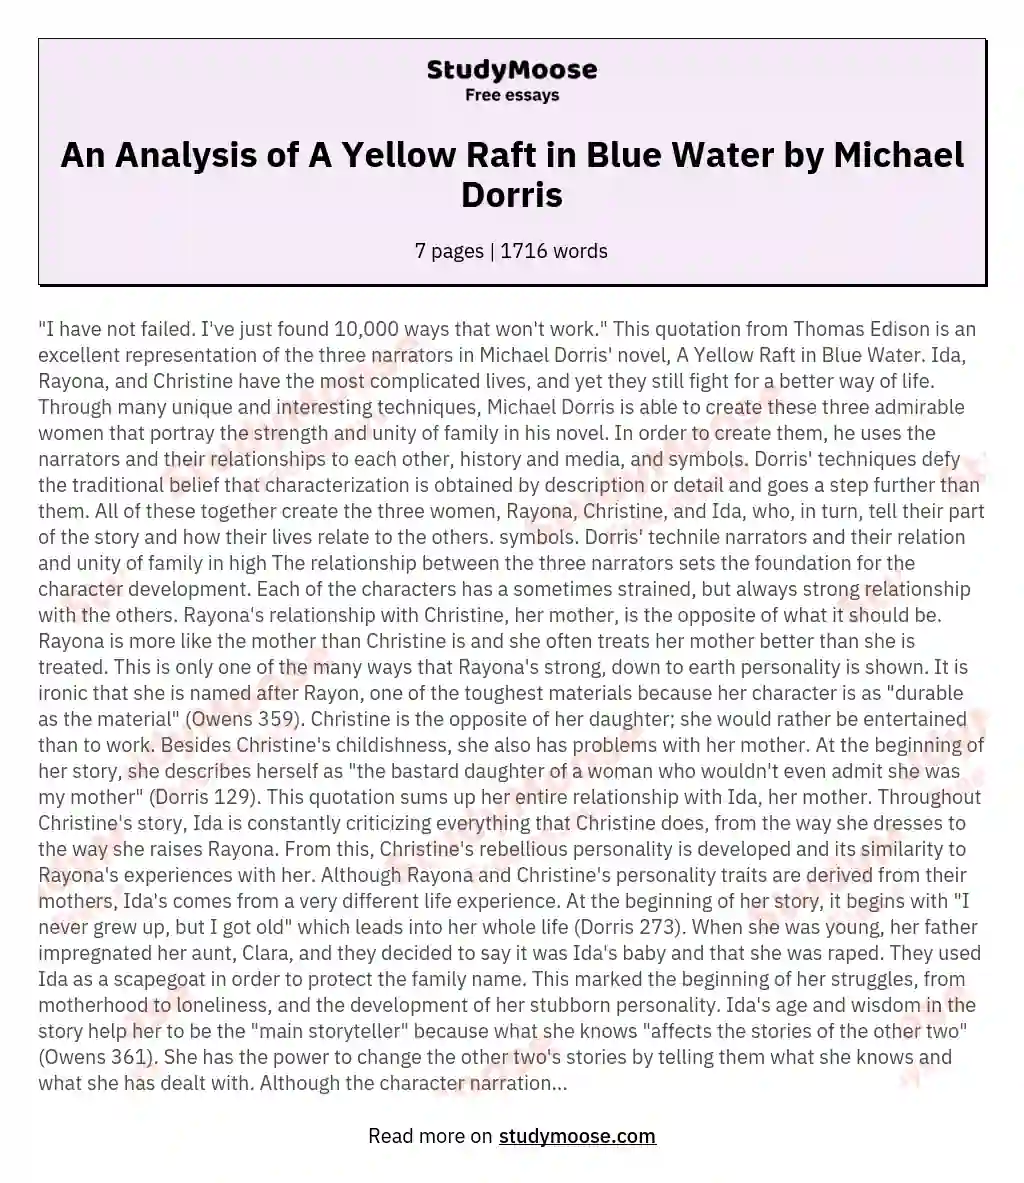 An Analysis of A Yellow Raft in Blue Water by Michael Dorris essay